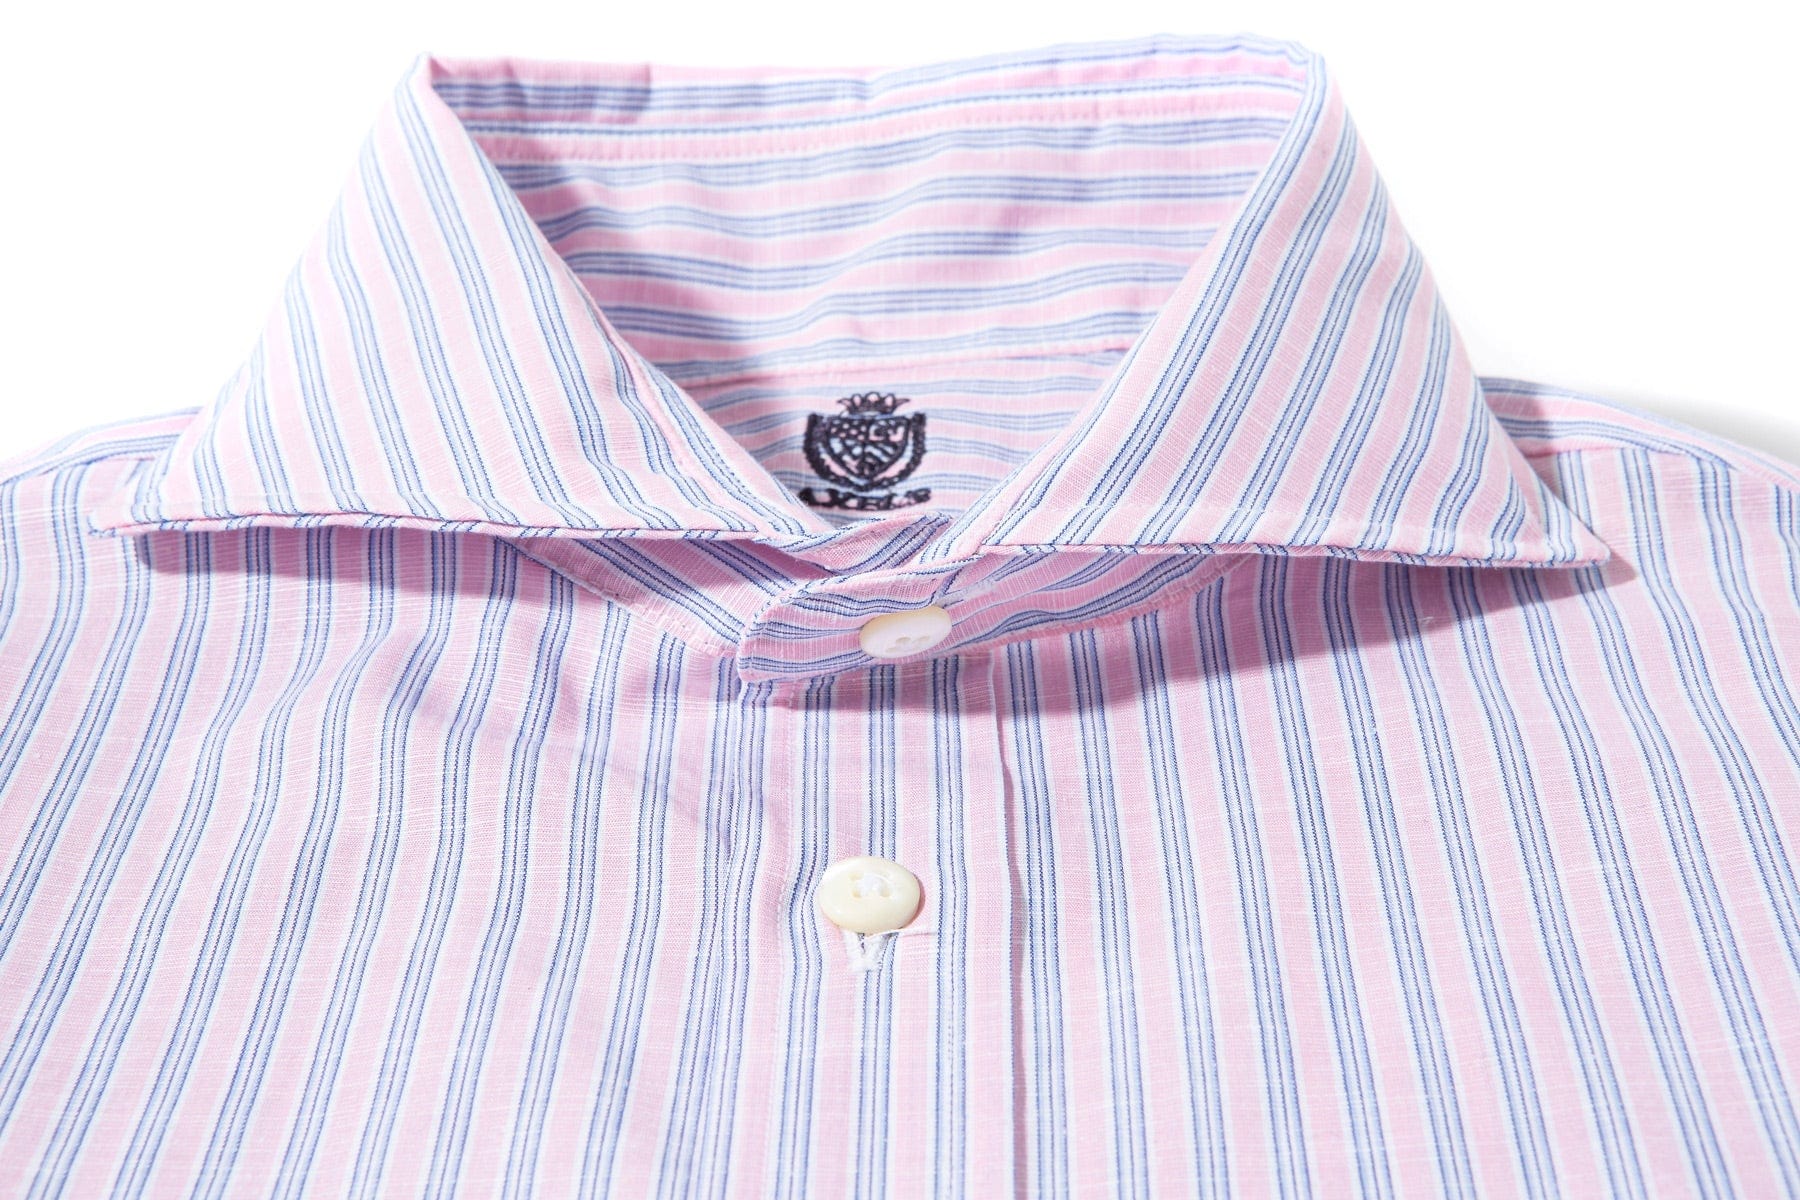 Taycan Cotton Linen Shirt in Pink - AXEL'S